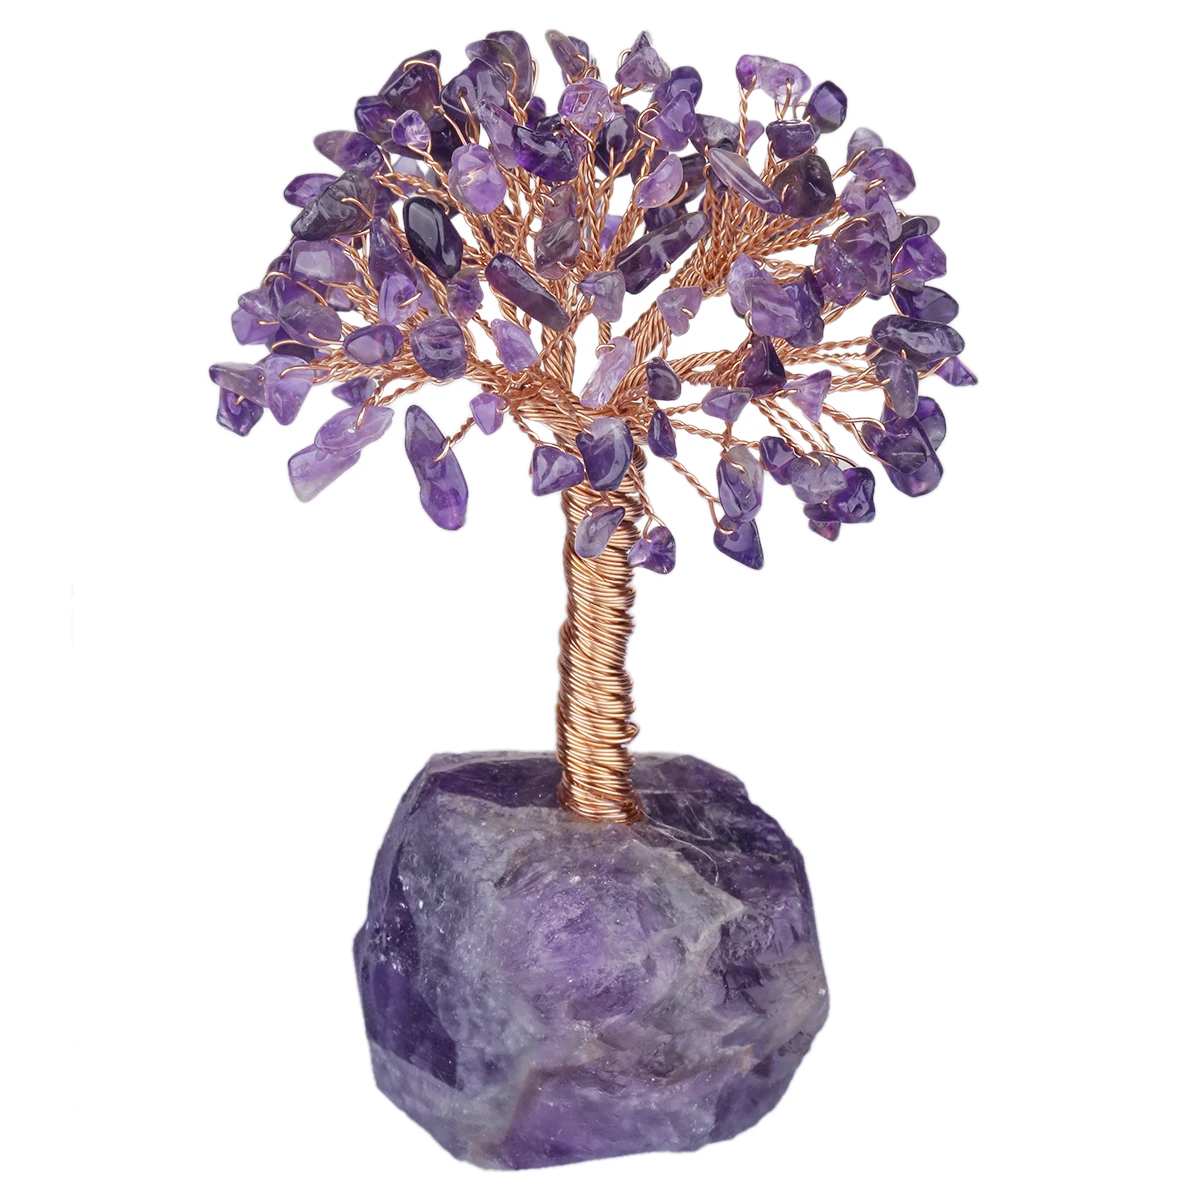 Natural Amethyst Crystal Tree With Rough Stone Base Healing Gemstone Chips Bonsai Money Tree Decoration For Wealth and Luck natural amethyst rough crystal stone drawer knobs cupboard wardrobe cabinet door pull handles with screws home decoration